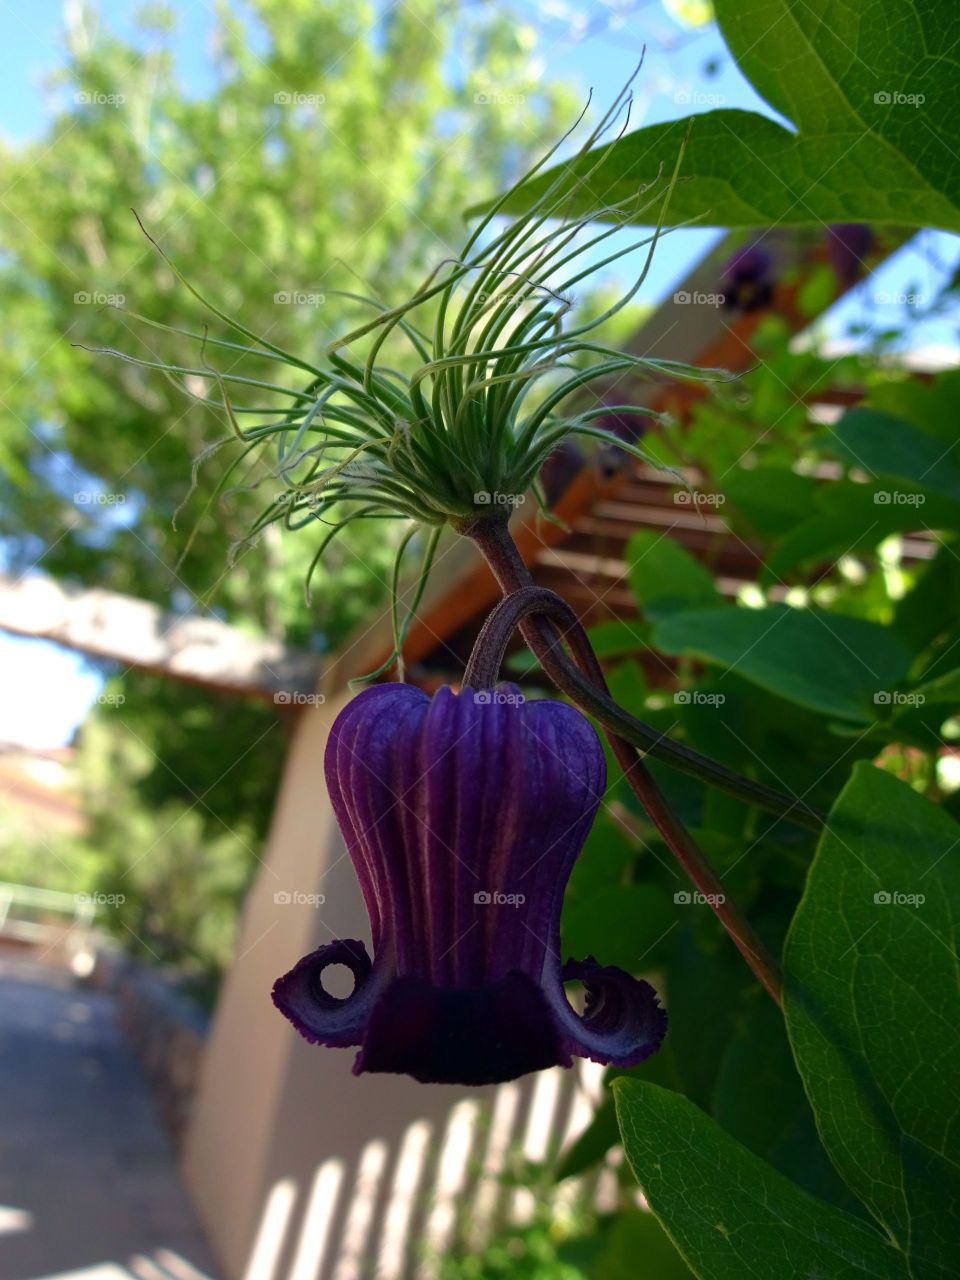 Leather Flower Clematis